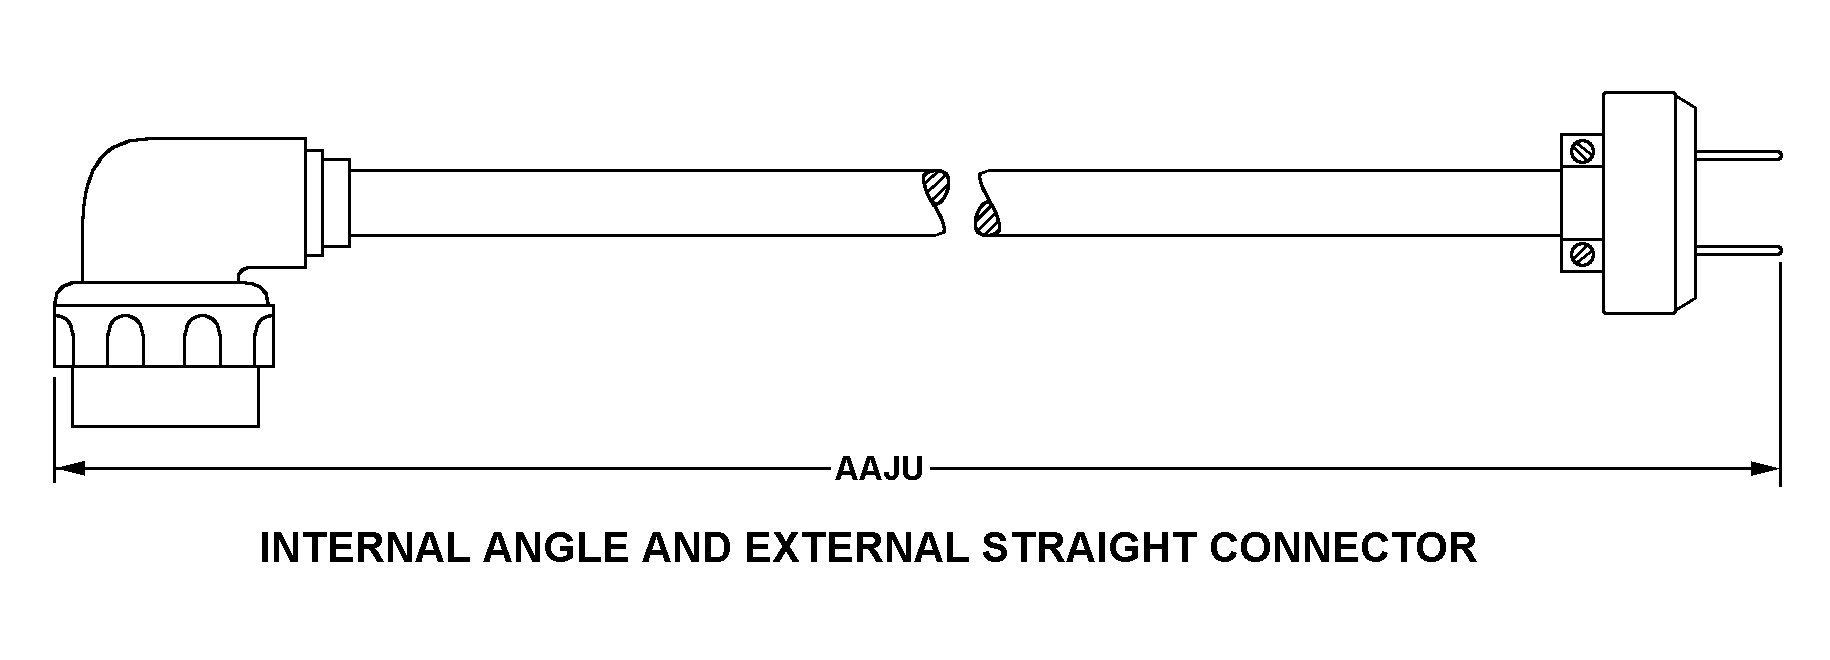 INTERNAL ANGLE AND EXTERNAL STRAIGHT CONNECTOR style nsn 5995-01-208-2992